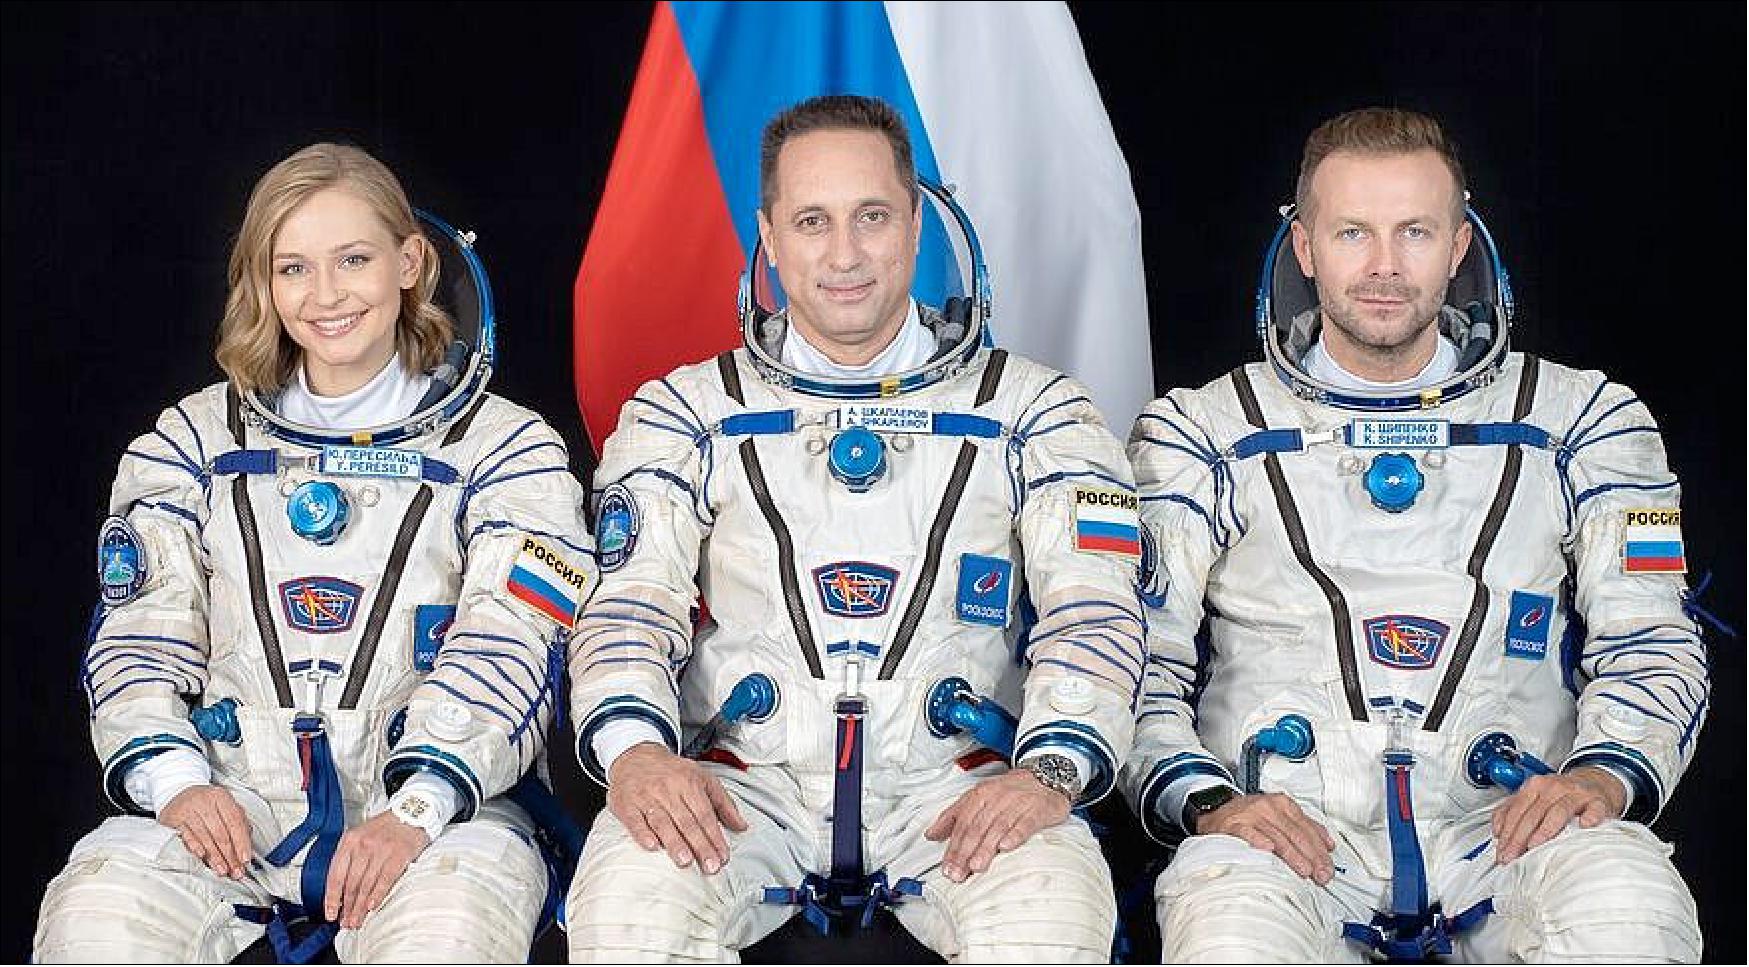 Figure 29: Actress Yulia Peresild (left) and director Klim Shipenko (right) joined Roscosmos cosmonaut Anton Shkaplerov on the Soyuz MS-19 spacecraft that flew to the ISS Oct. 5 (image credit: Roscosmos)